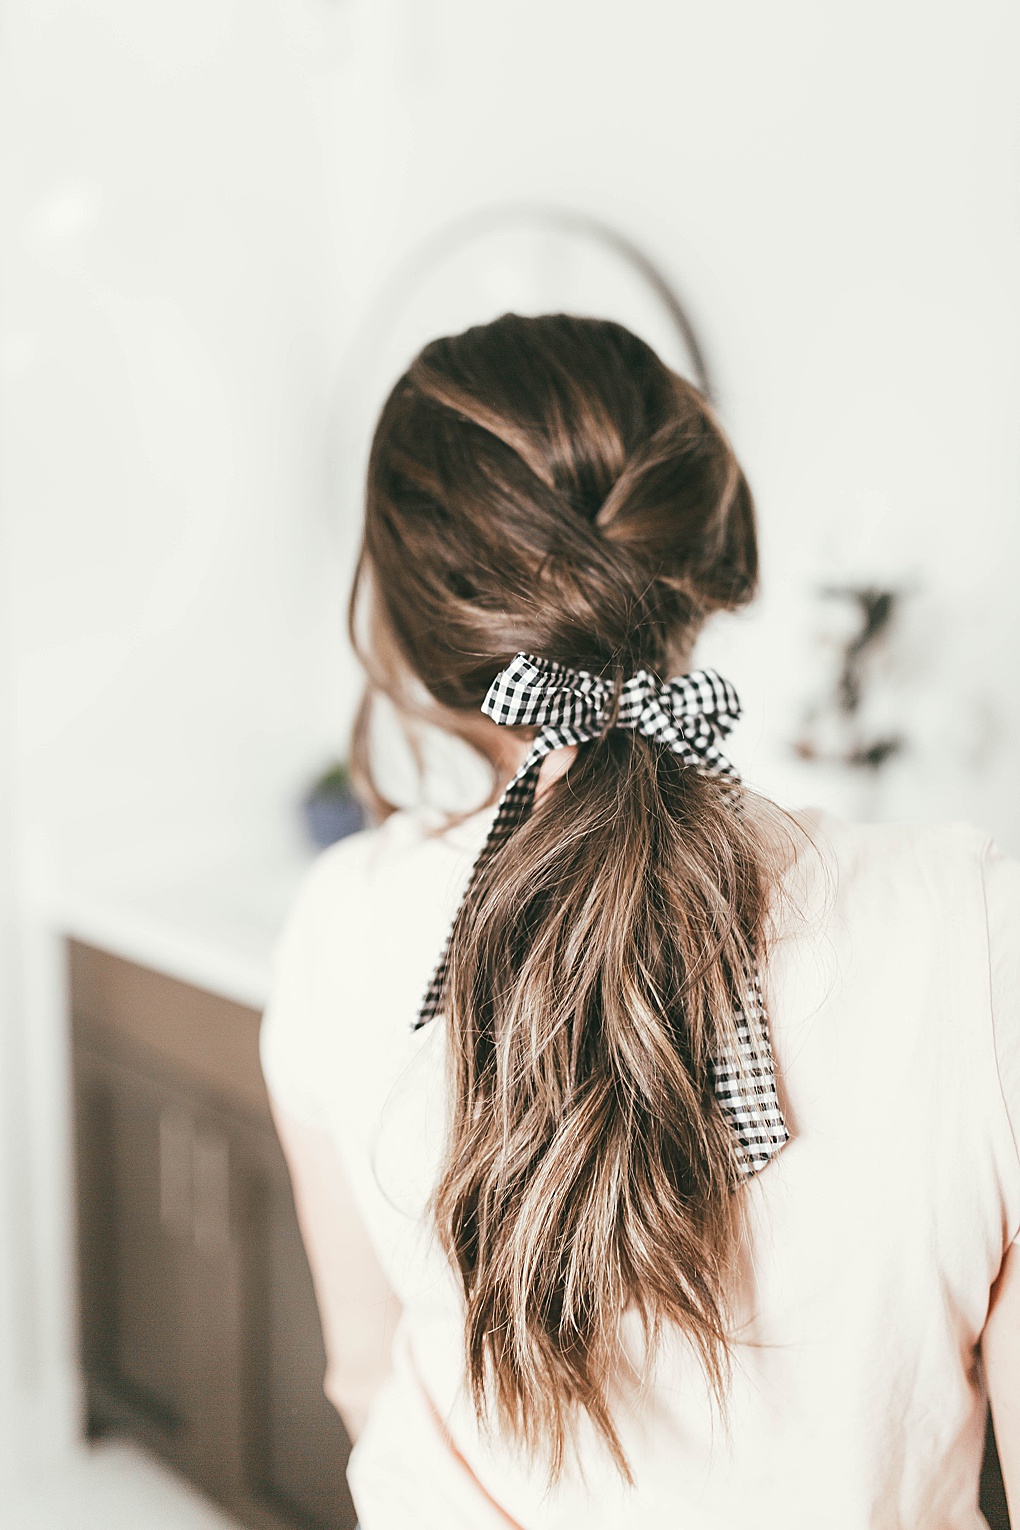 Curious how to jazz up a simple pony tail? Utah Style Blogger Dani Marie is sharing the prettiest simple pony tail tutorial here!